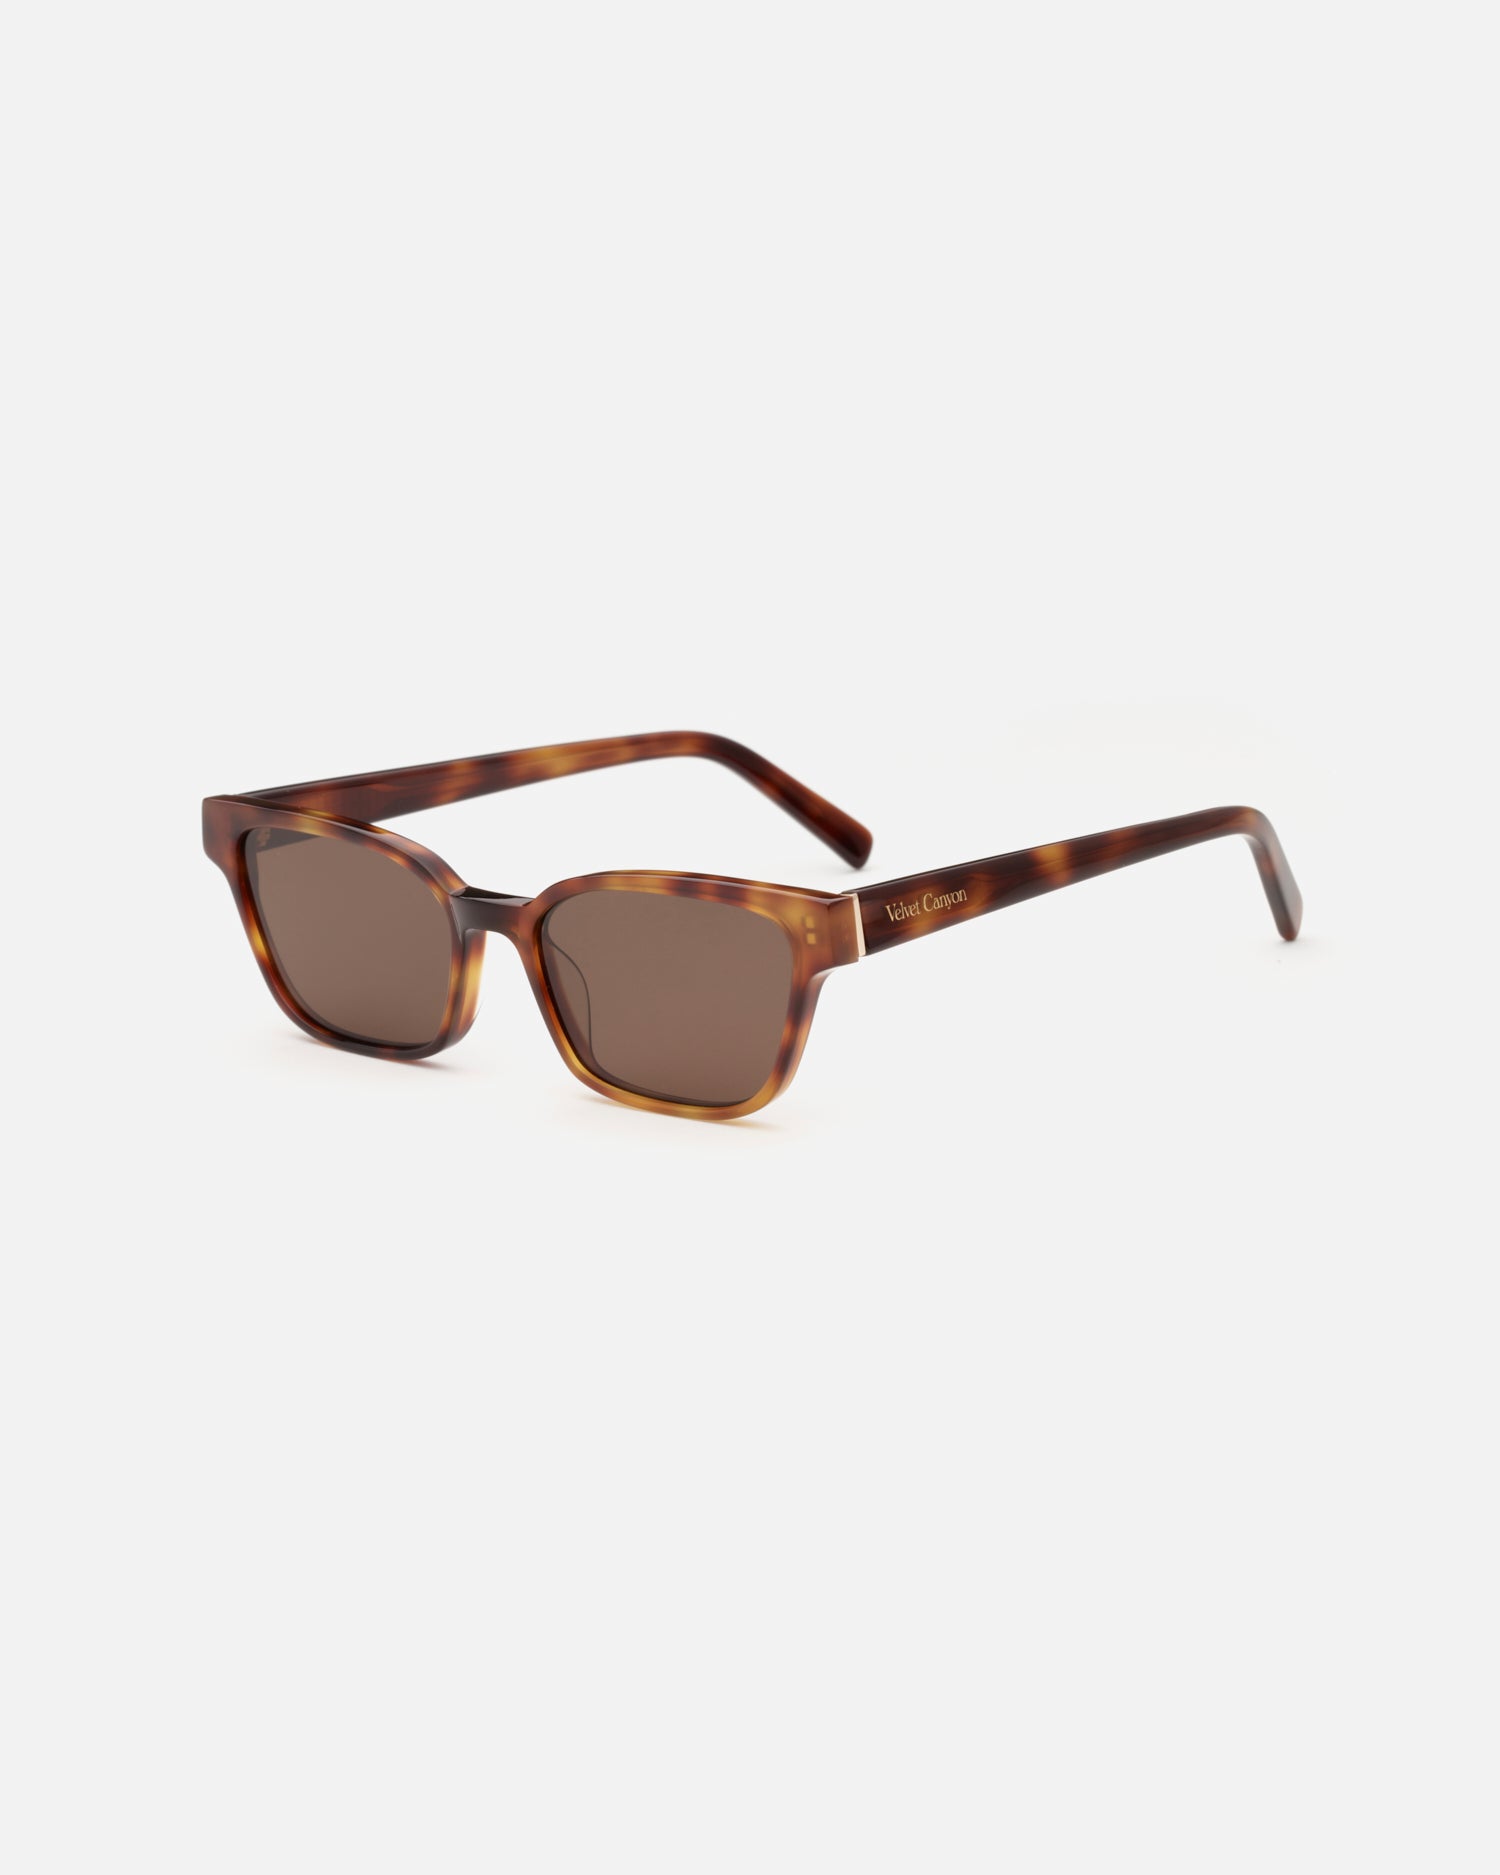 The Visionary luxe sunglasses by Velvet Canyon in Havana Foncé